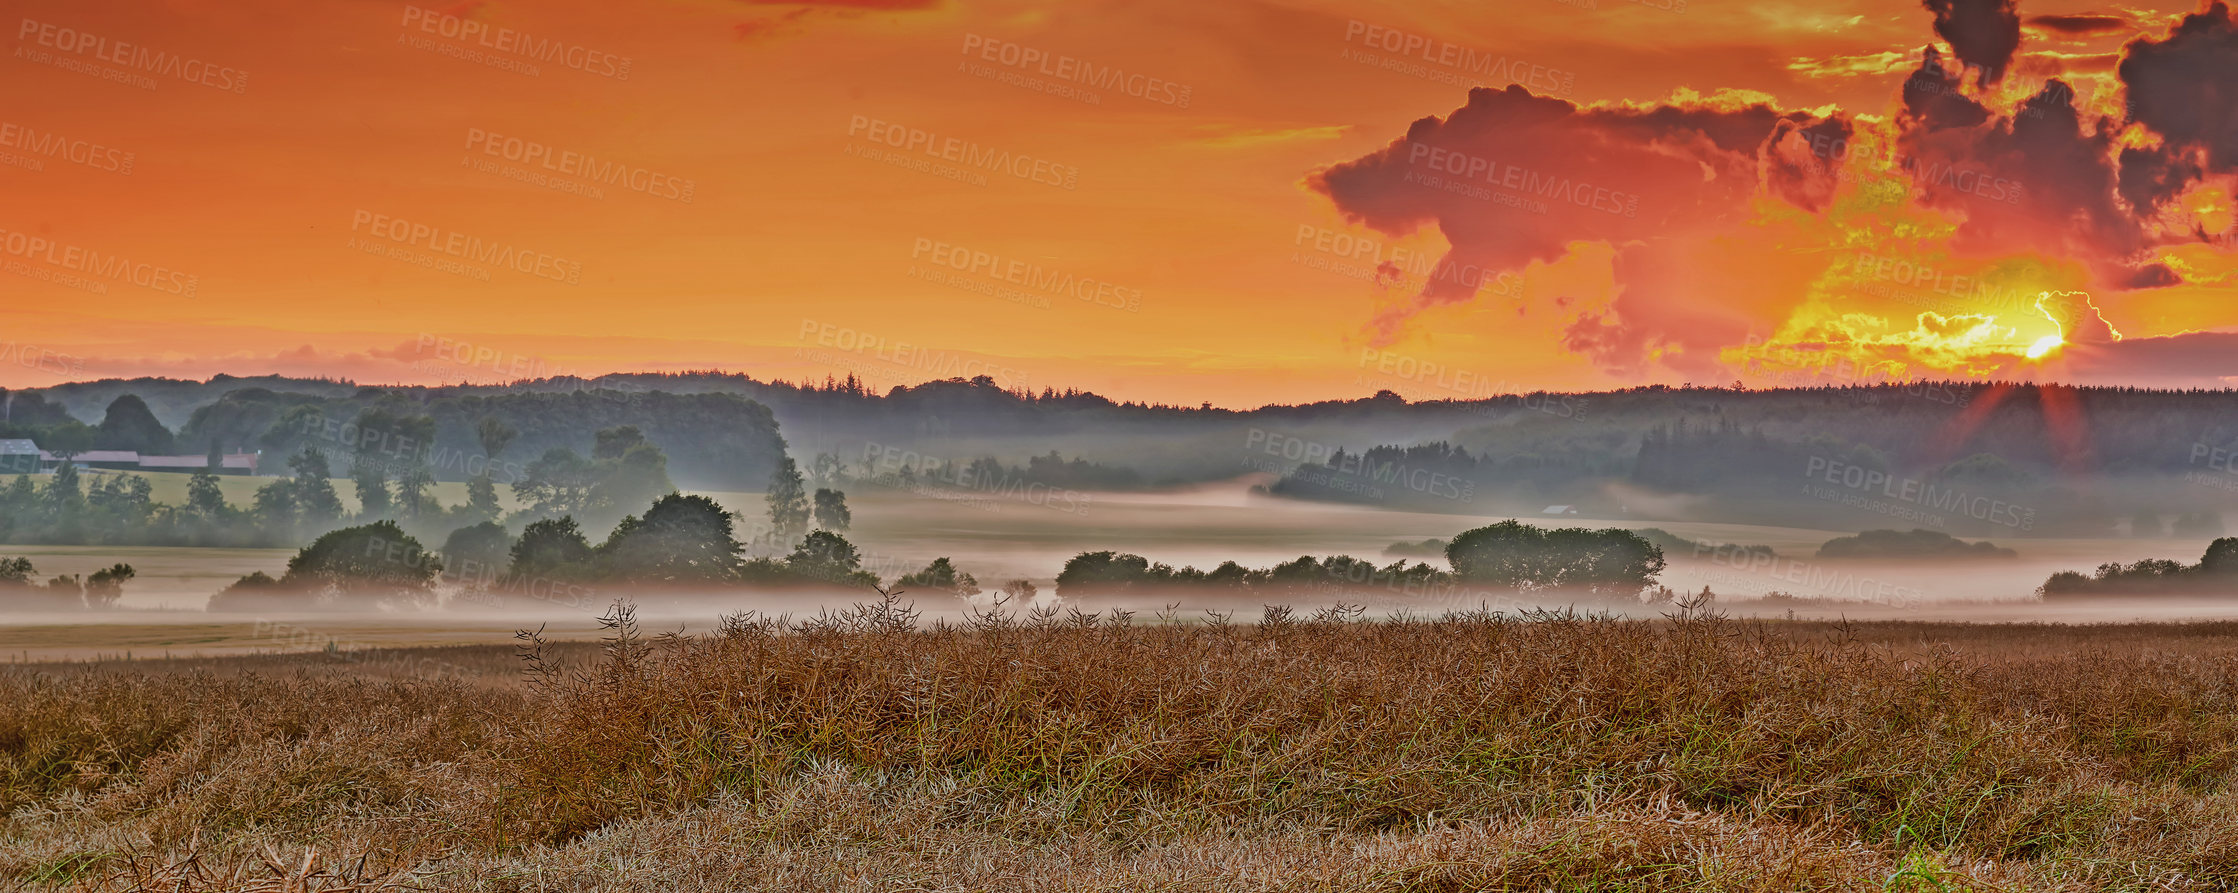 Buy stock photo A photo of a vibrant country field in harvest